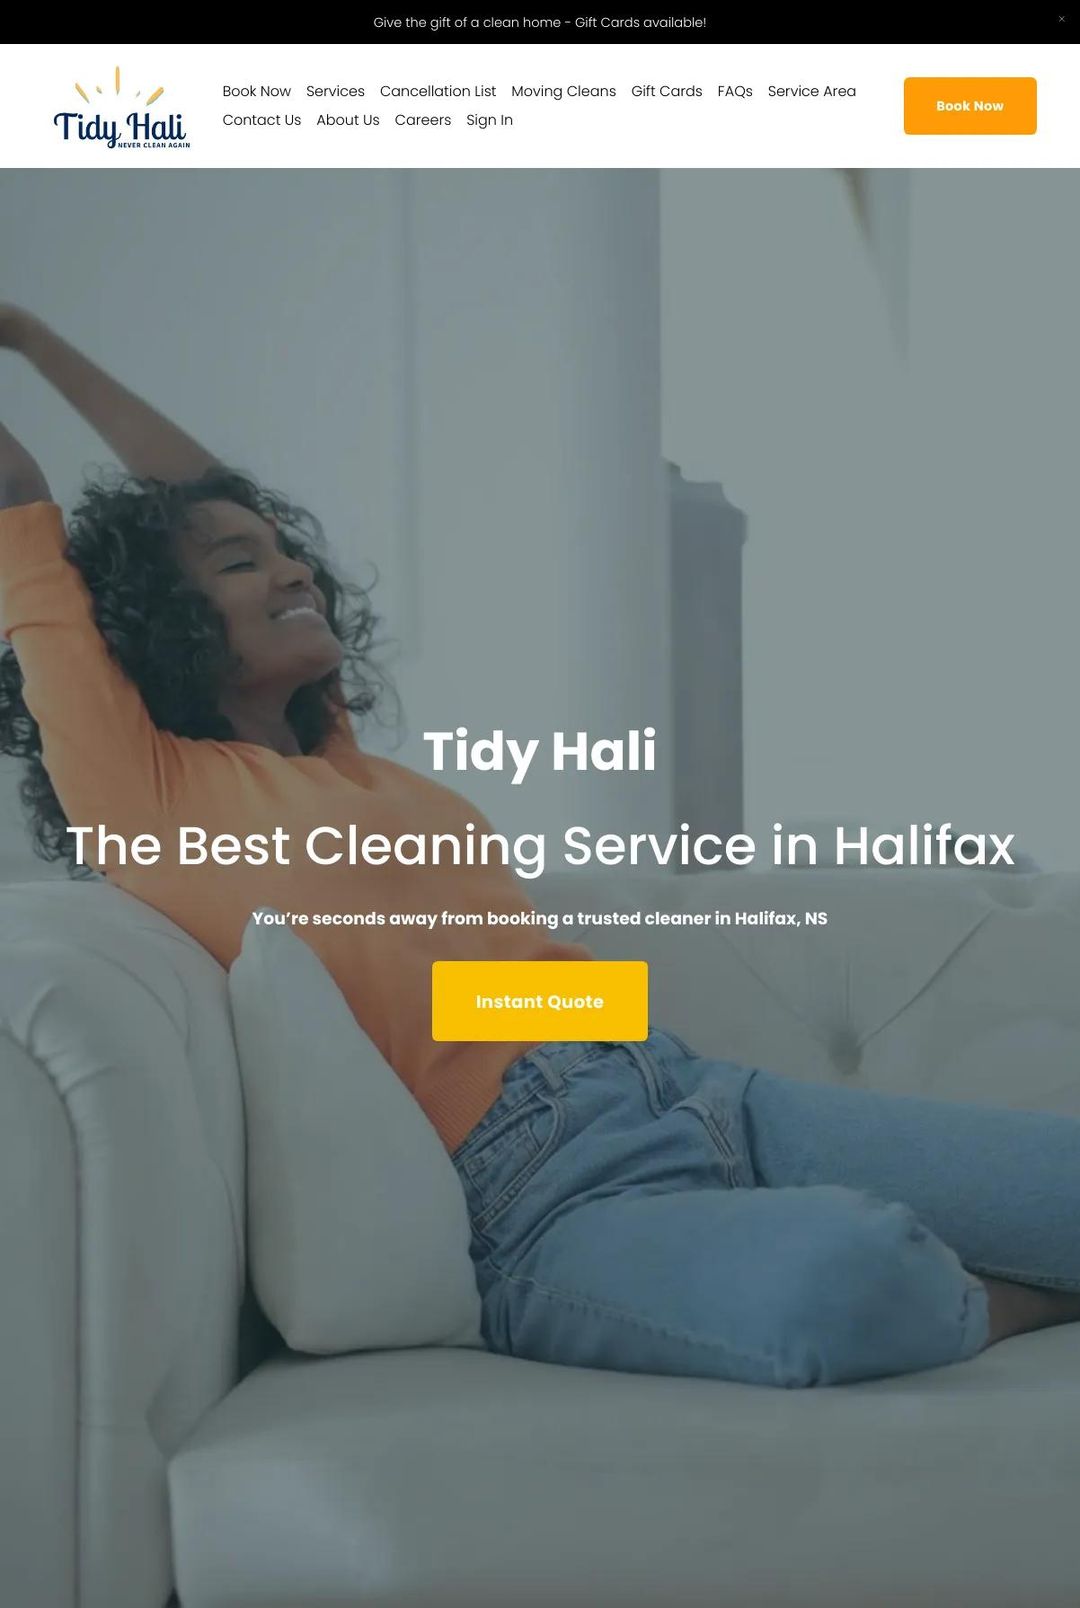 Screenshot 1 of Tidy Hali (Example Squarespace Cleaning Services Website)